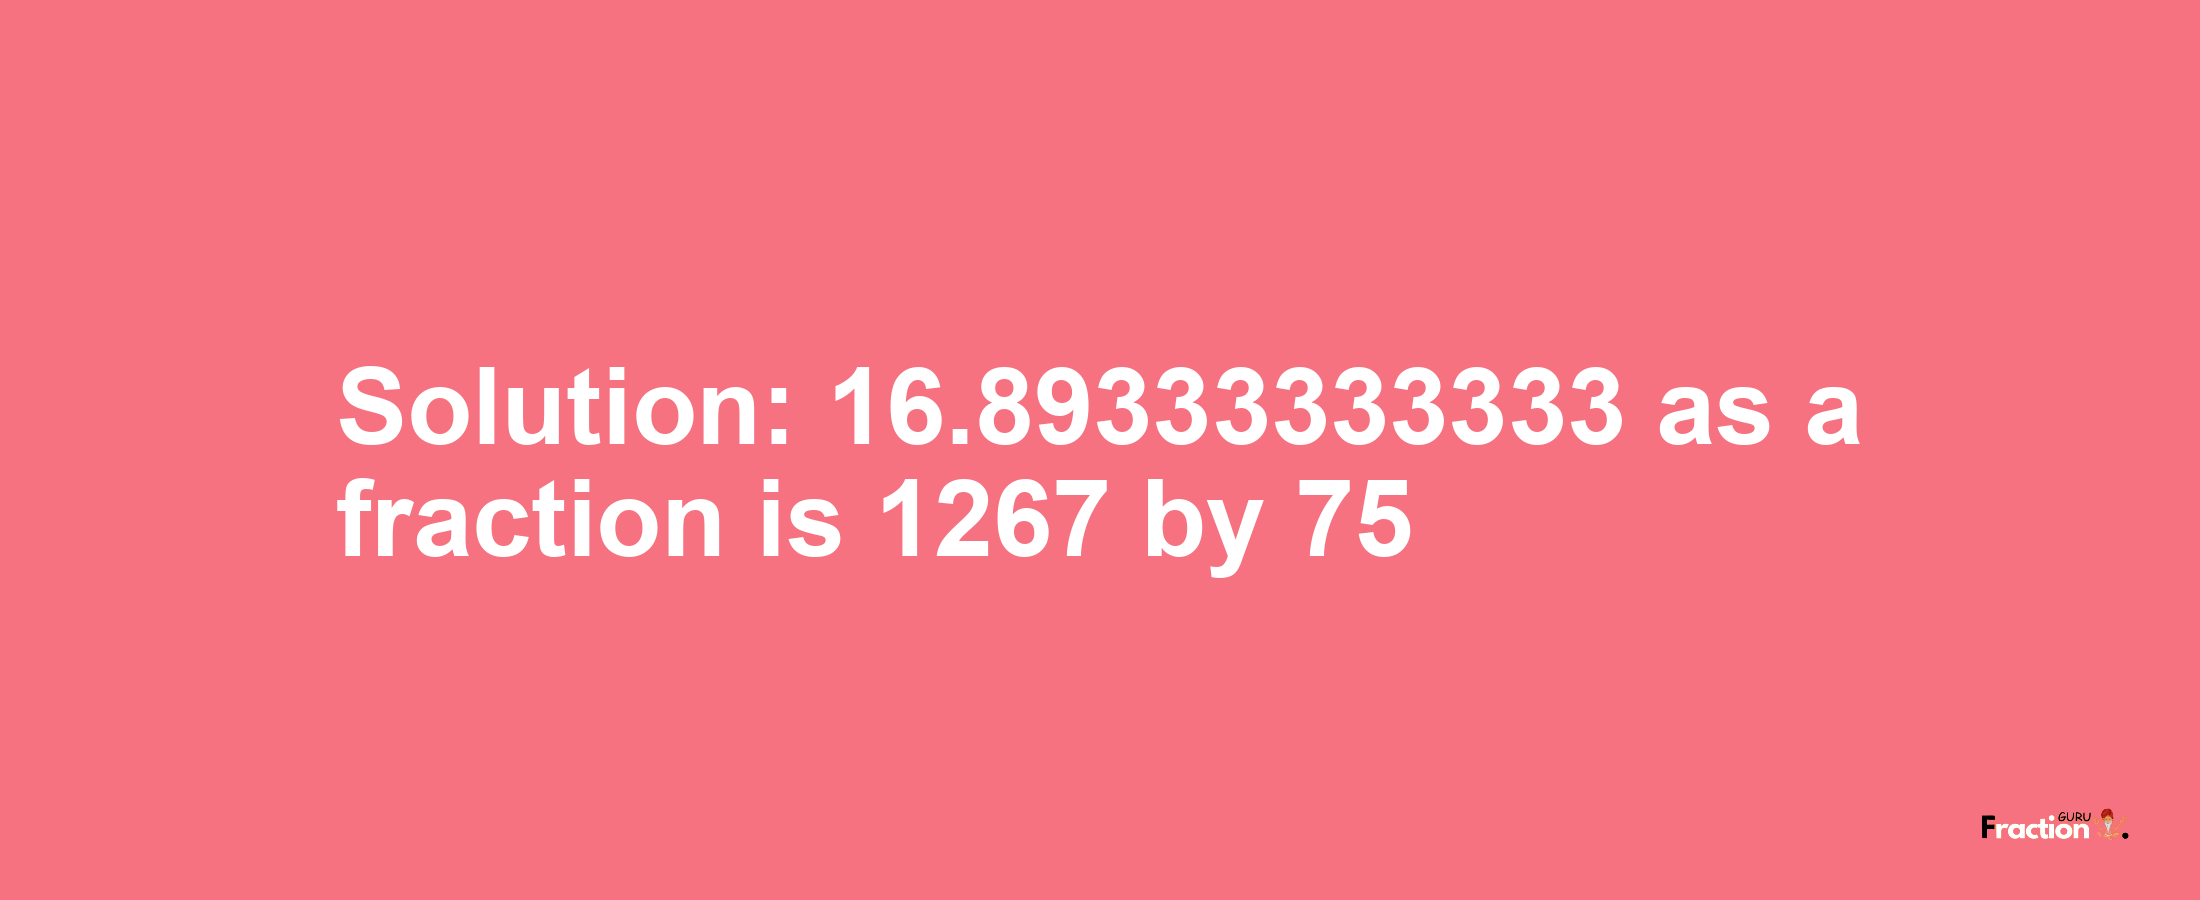 Solution:16.89333333333 as a fraction is 1267/75